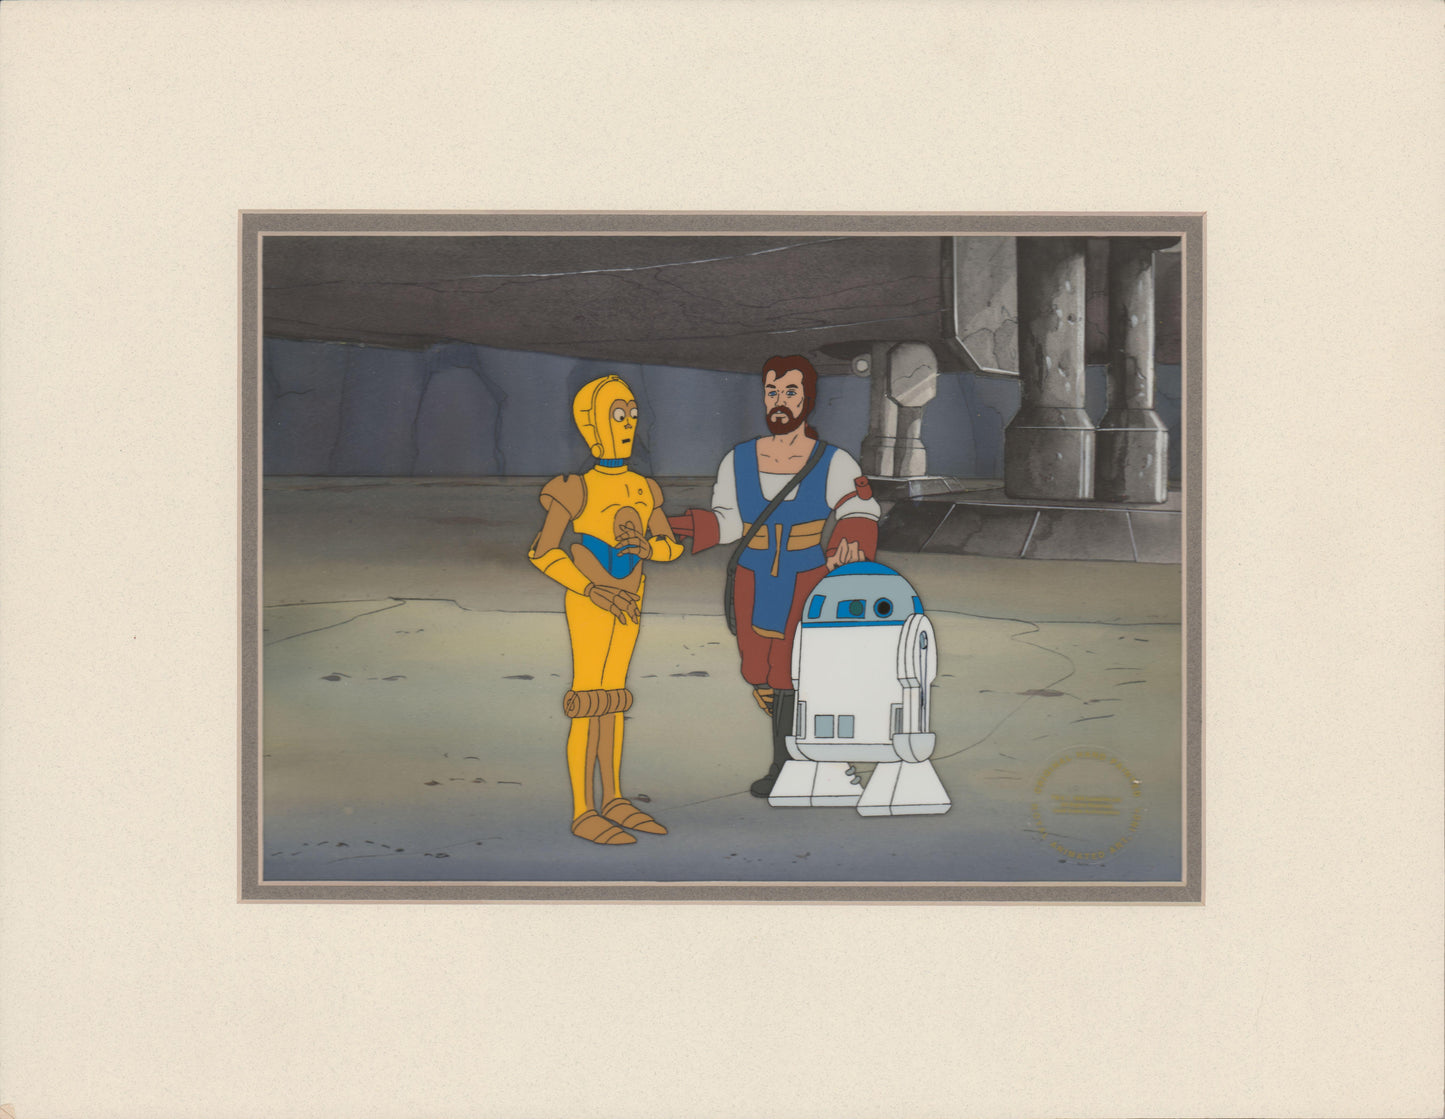 Star Wars Droids C-3PO R2D2 and Mungo Original Production Animation Art Cel from Nelvana 1985-1986 1